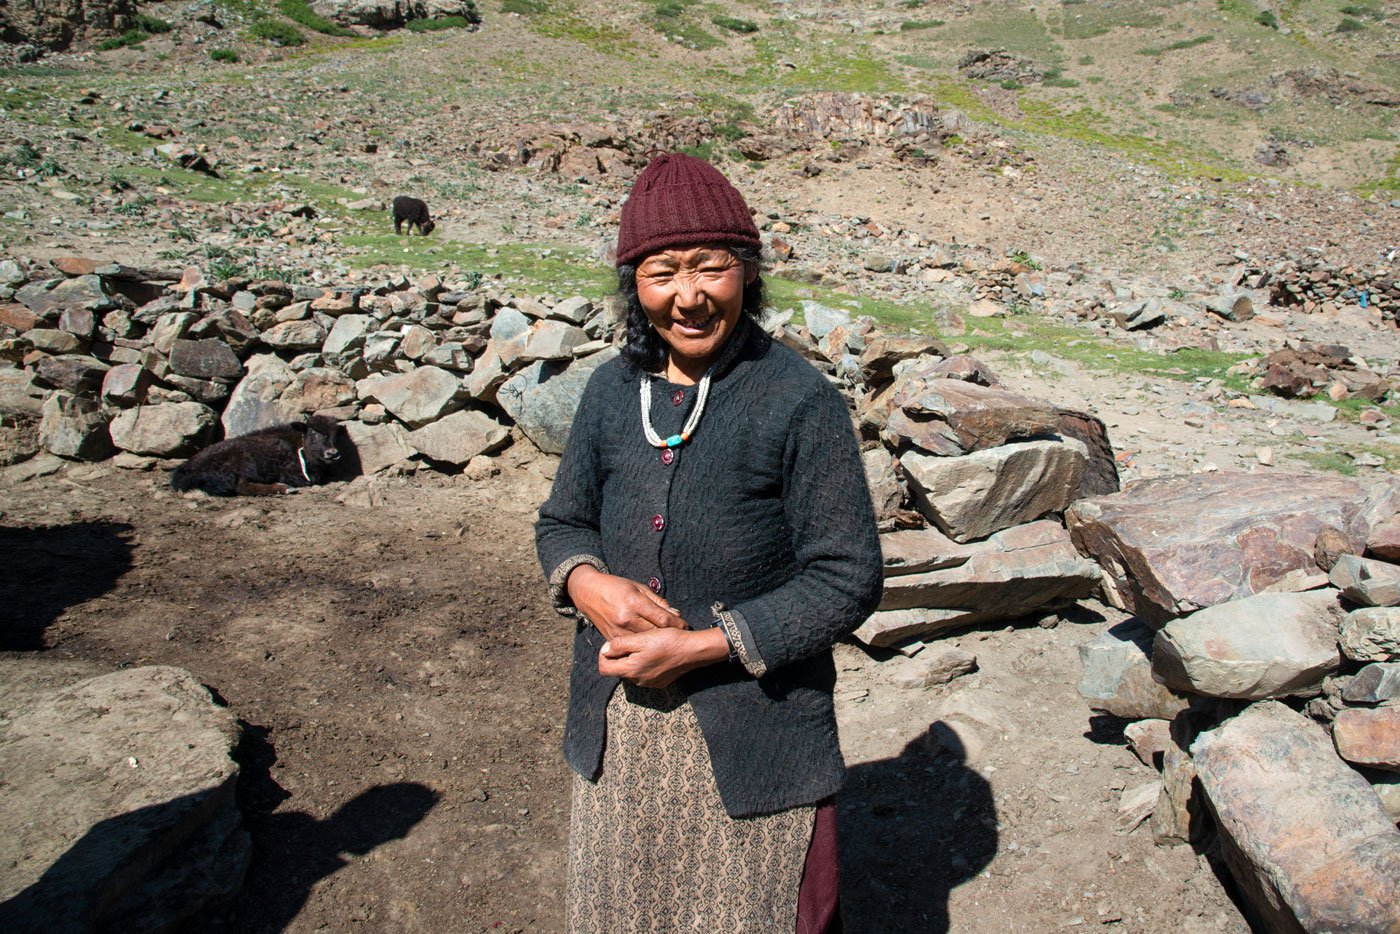 Padma Thumo has been a yak herder for more than 30 years in Abran village in Kargil district of Ladakh